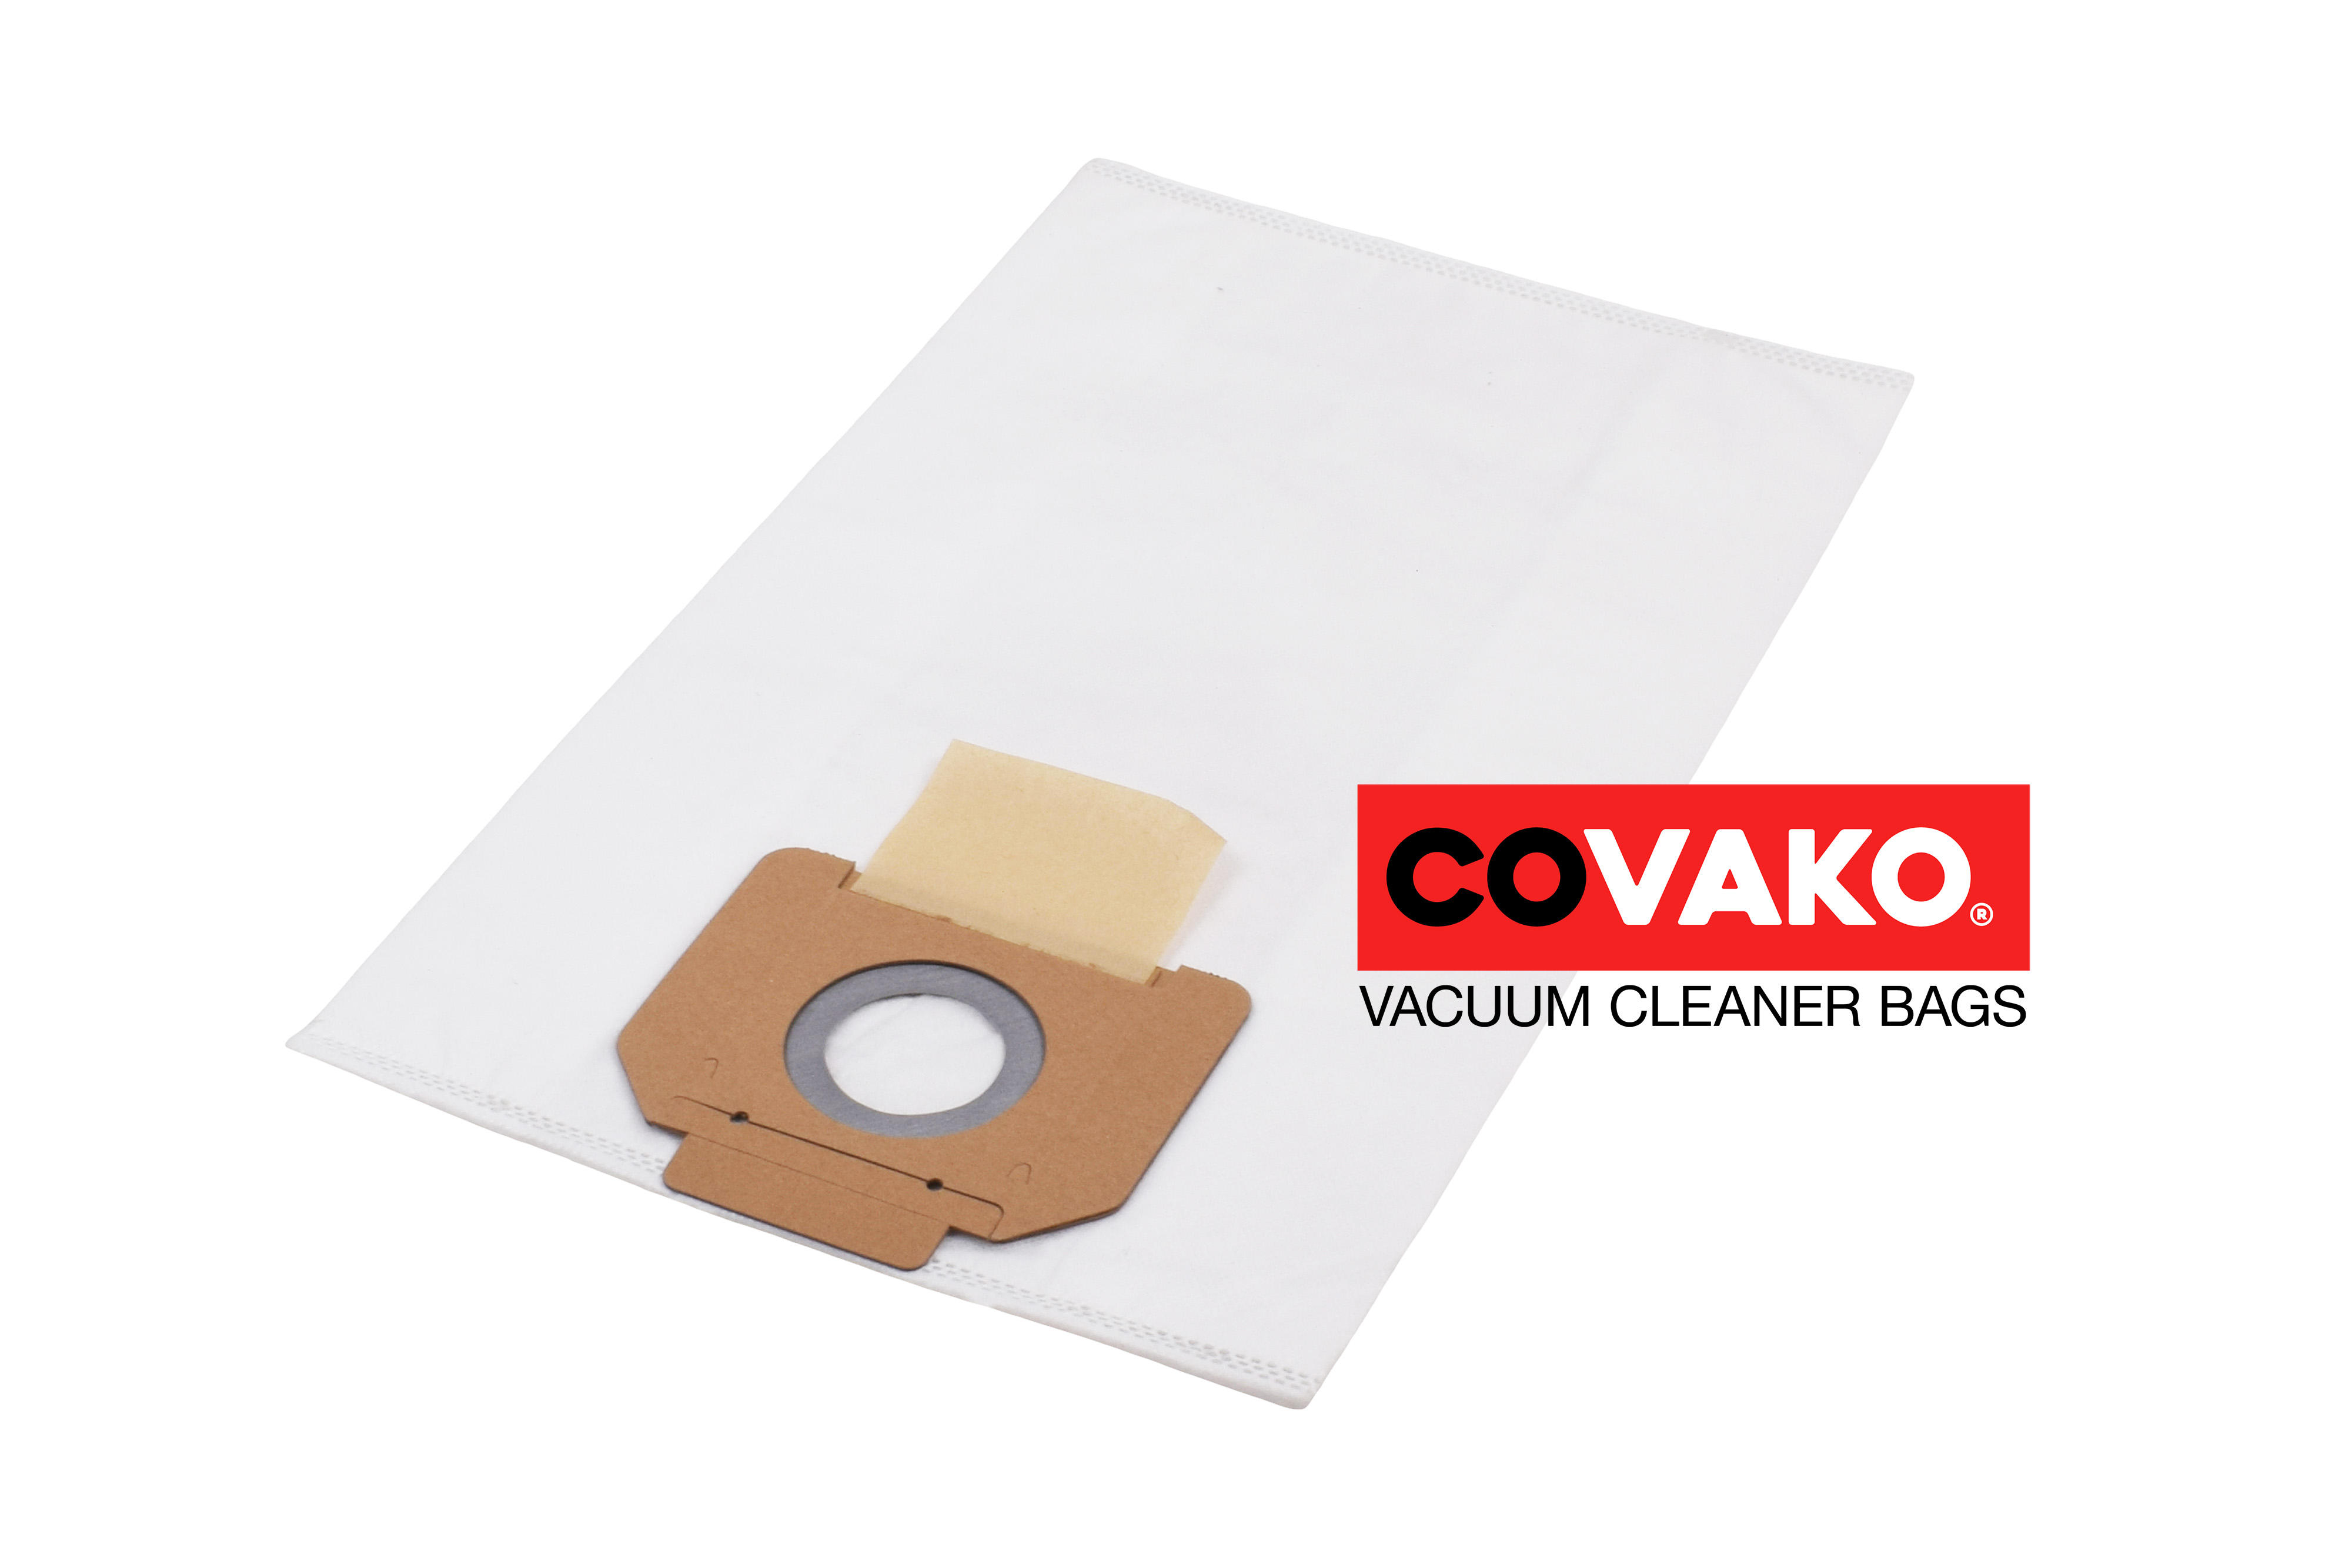 Gansow GP 16 P+ / Synthesis - Gansow vacuum cleaner bags